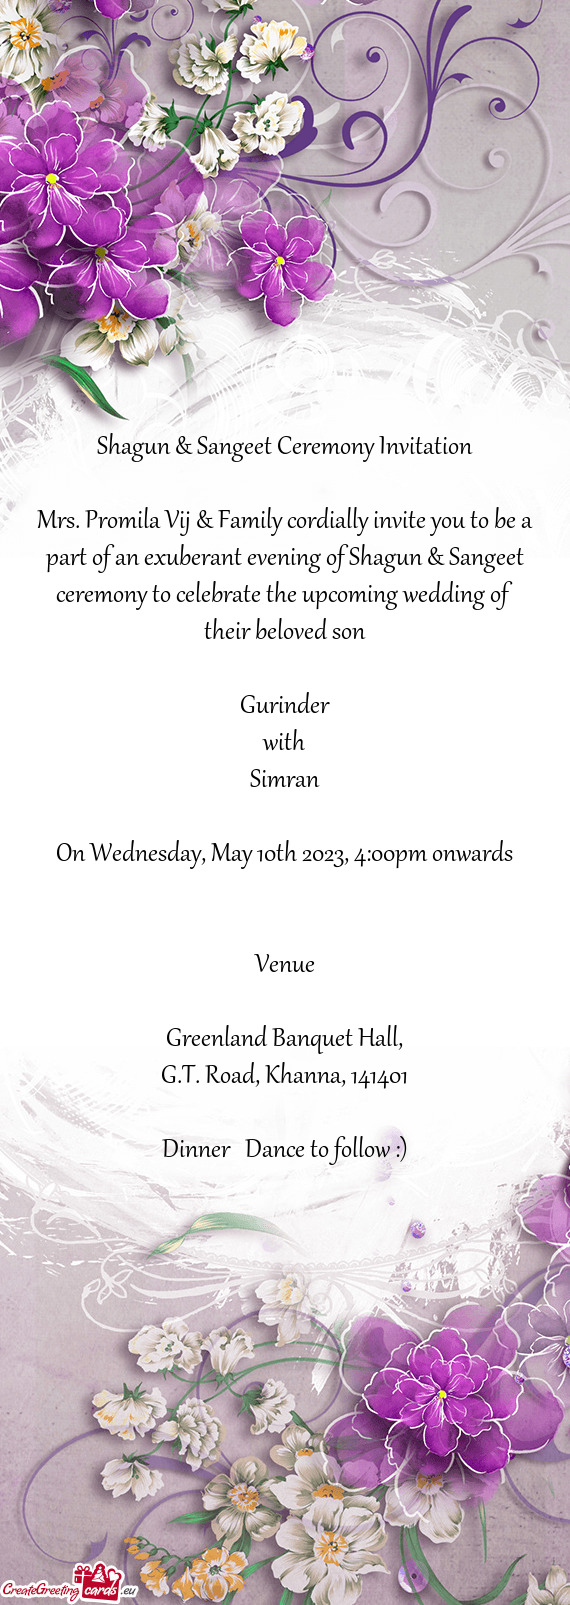 Mrs. Promila Vij & Family cordially invite you to be a part of an exuberant evening of Shagun & Sang